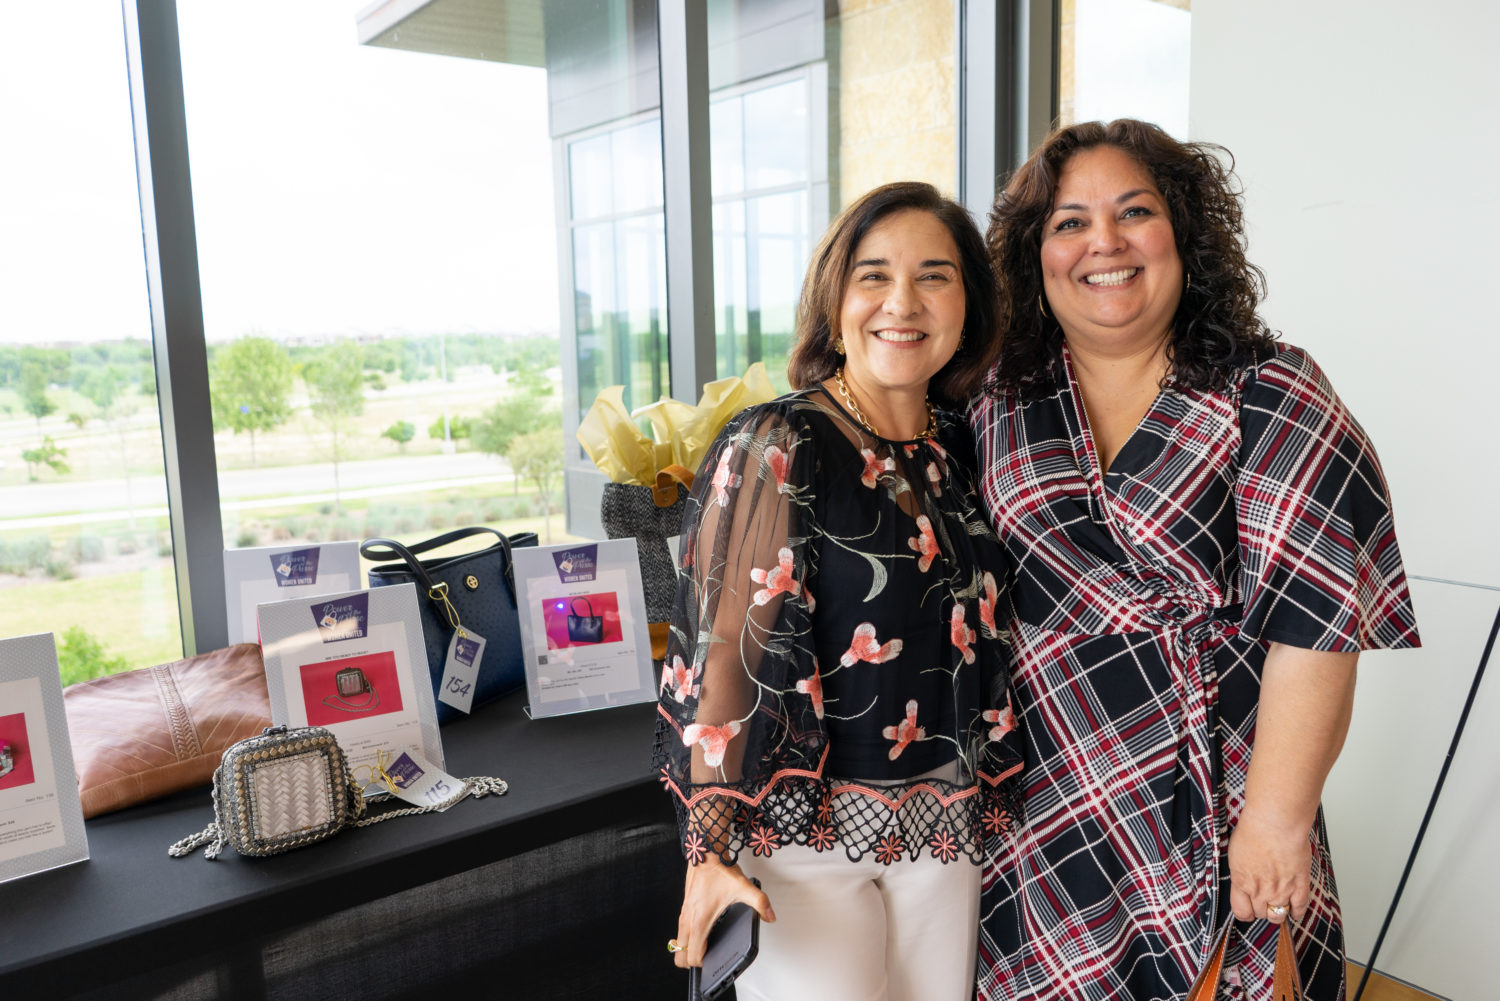 Power of the Purse - United Way of San Antonio and Bexar County